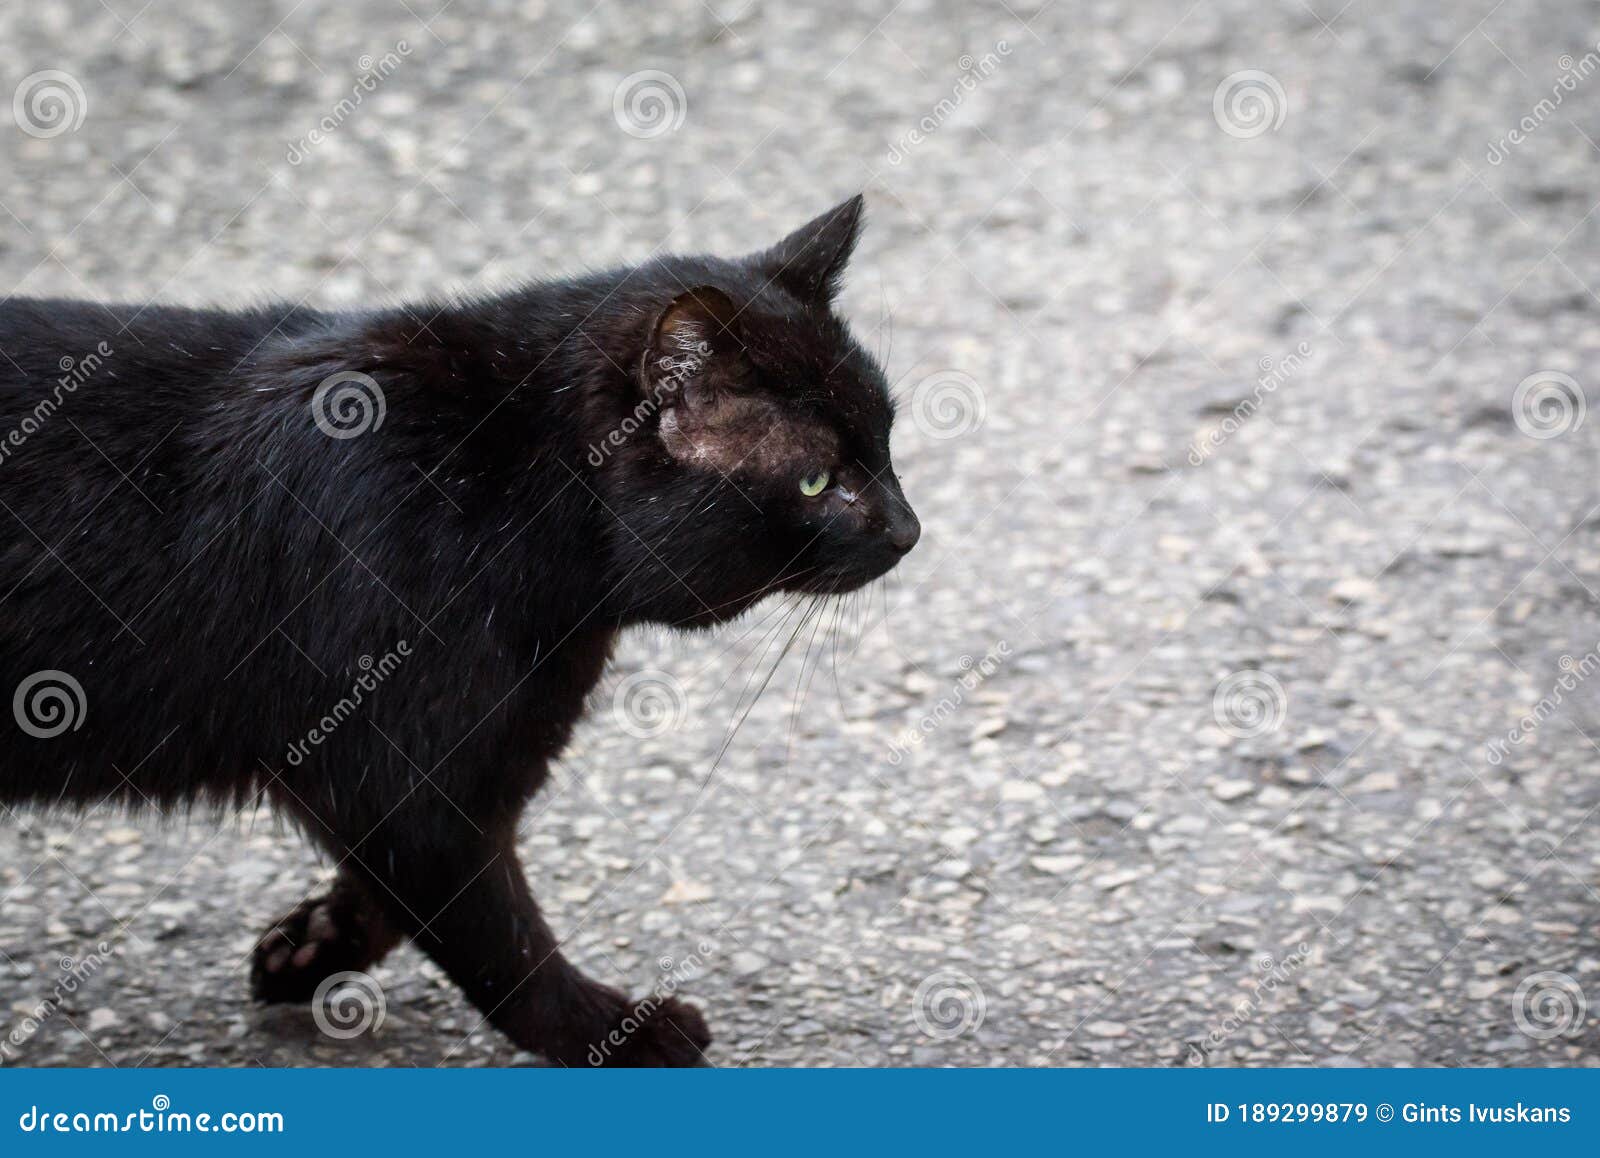 black stray cat on the stree in city.